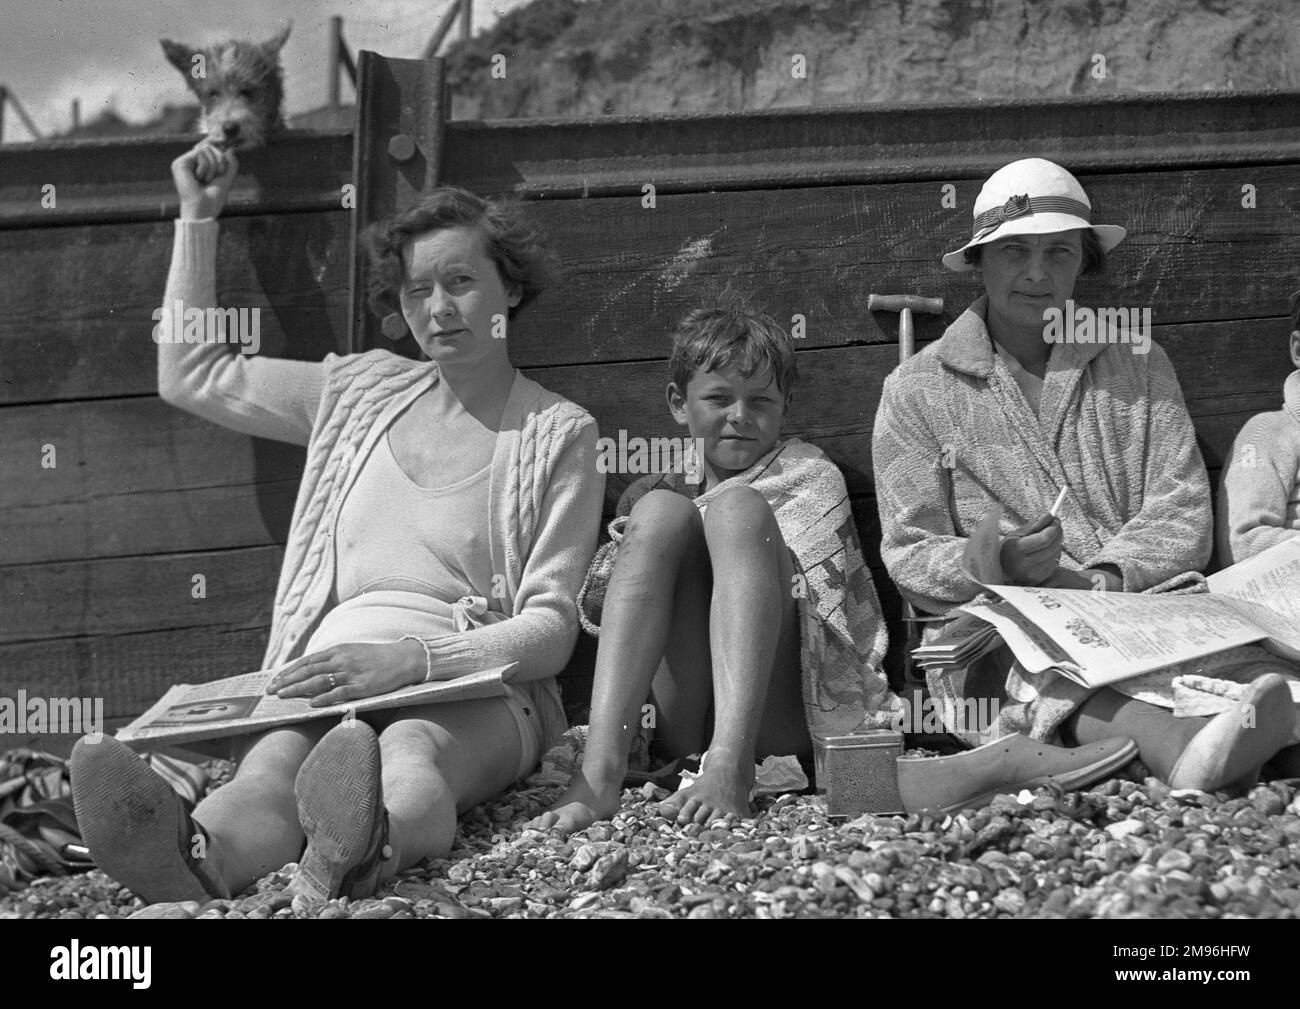 People on holiday, leaning against a breaker on a pebbly beach.  The woman on the left is holding up some food for a little dog. Stock Photo